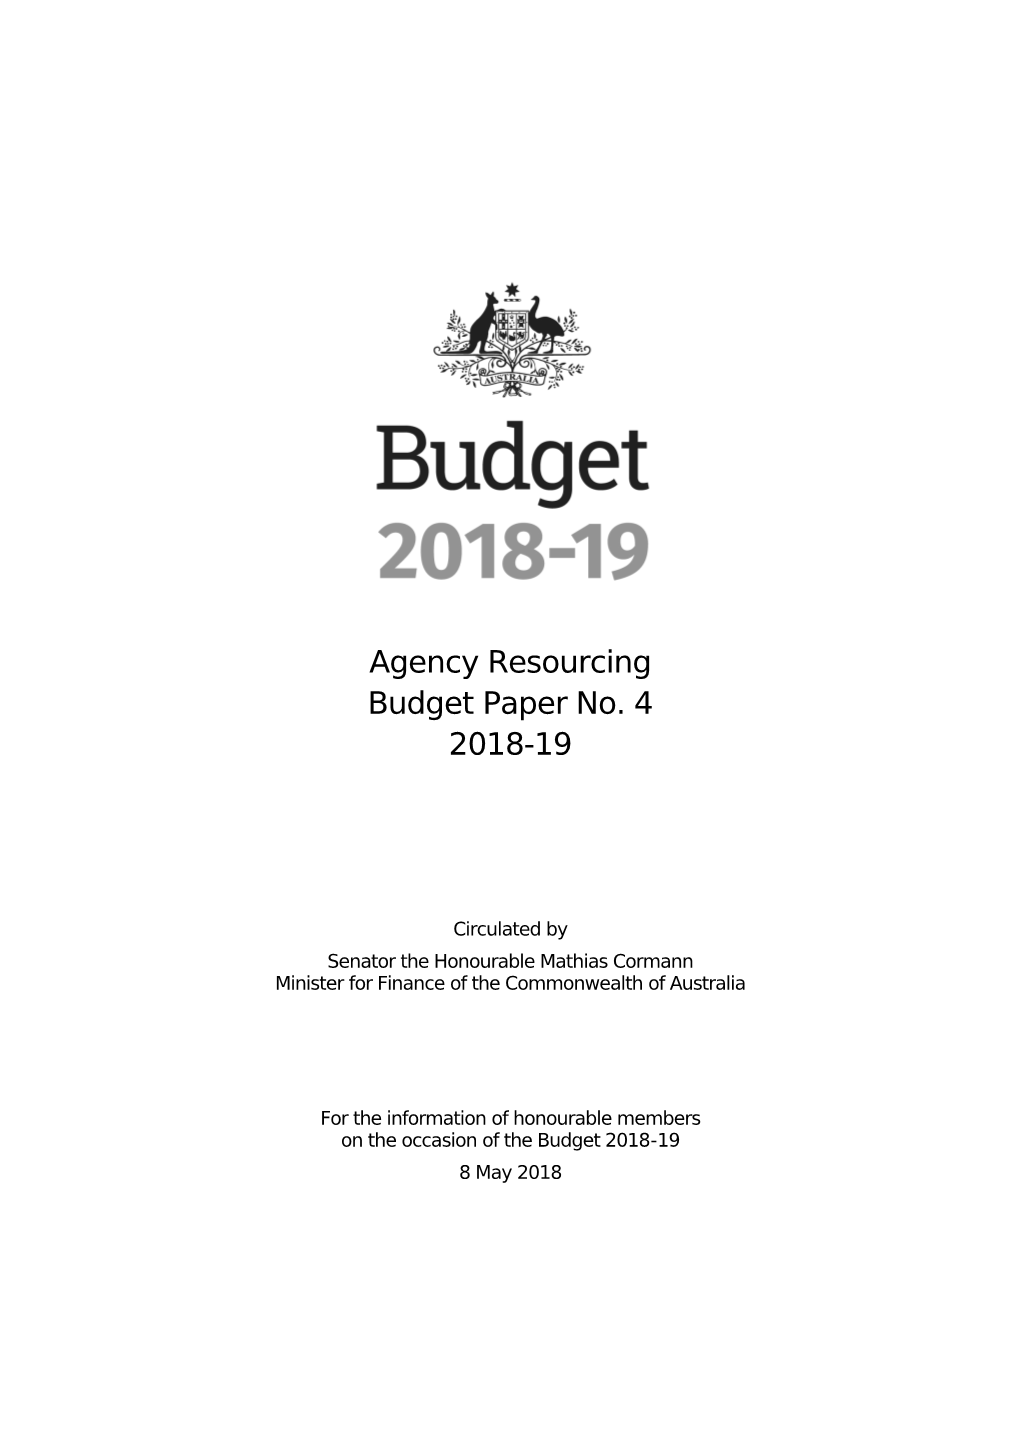 Agency Resourcing, Budget Paper No. 4